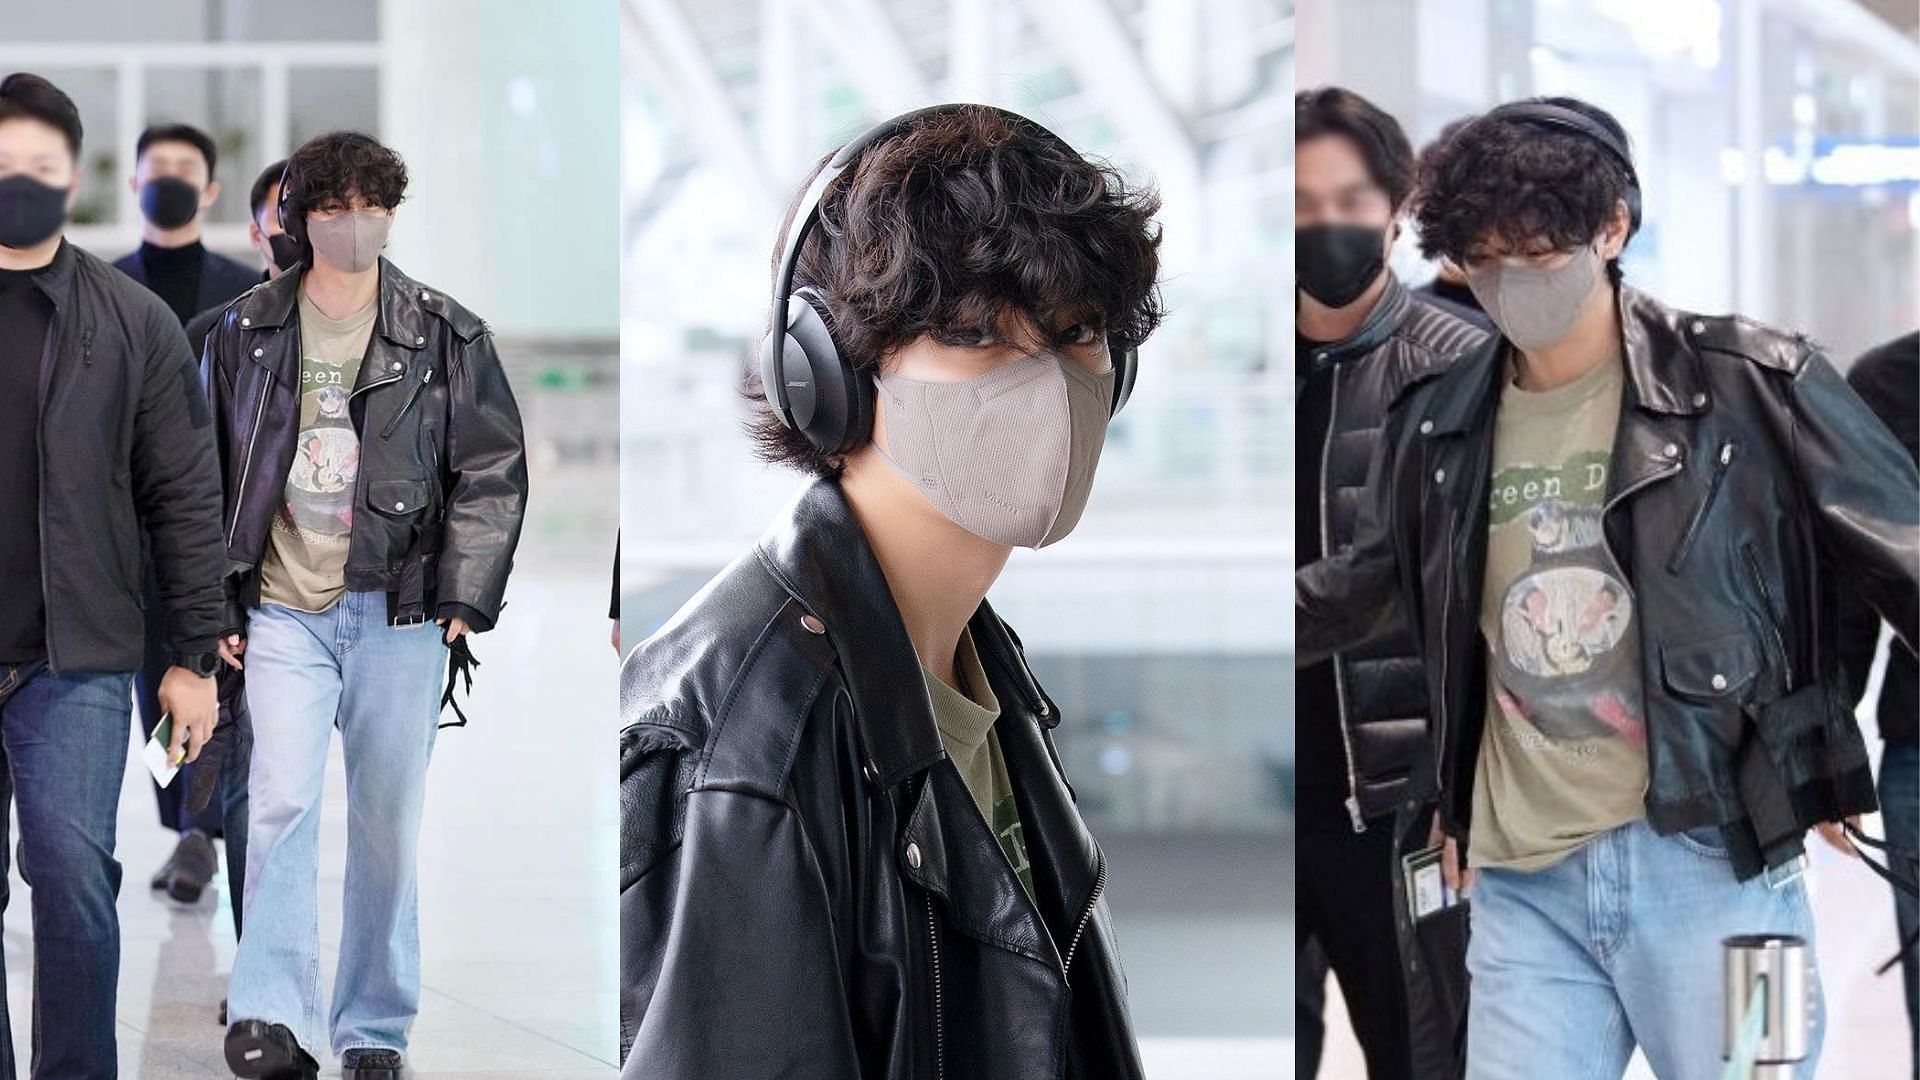 BTS's J-Hope Gains Attention For His Impressive Airport Fashion